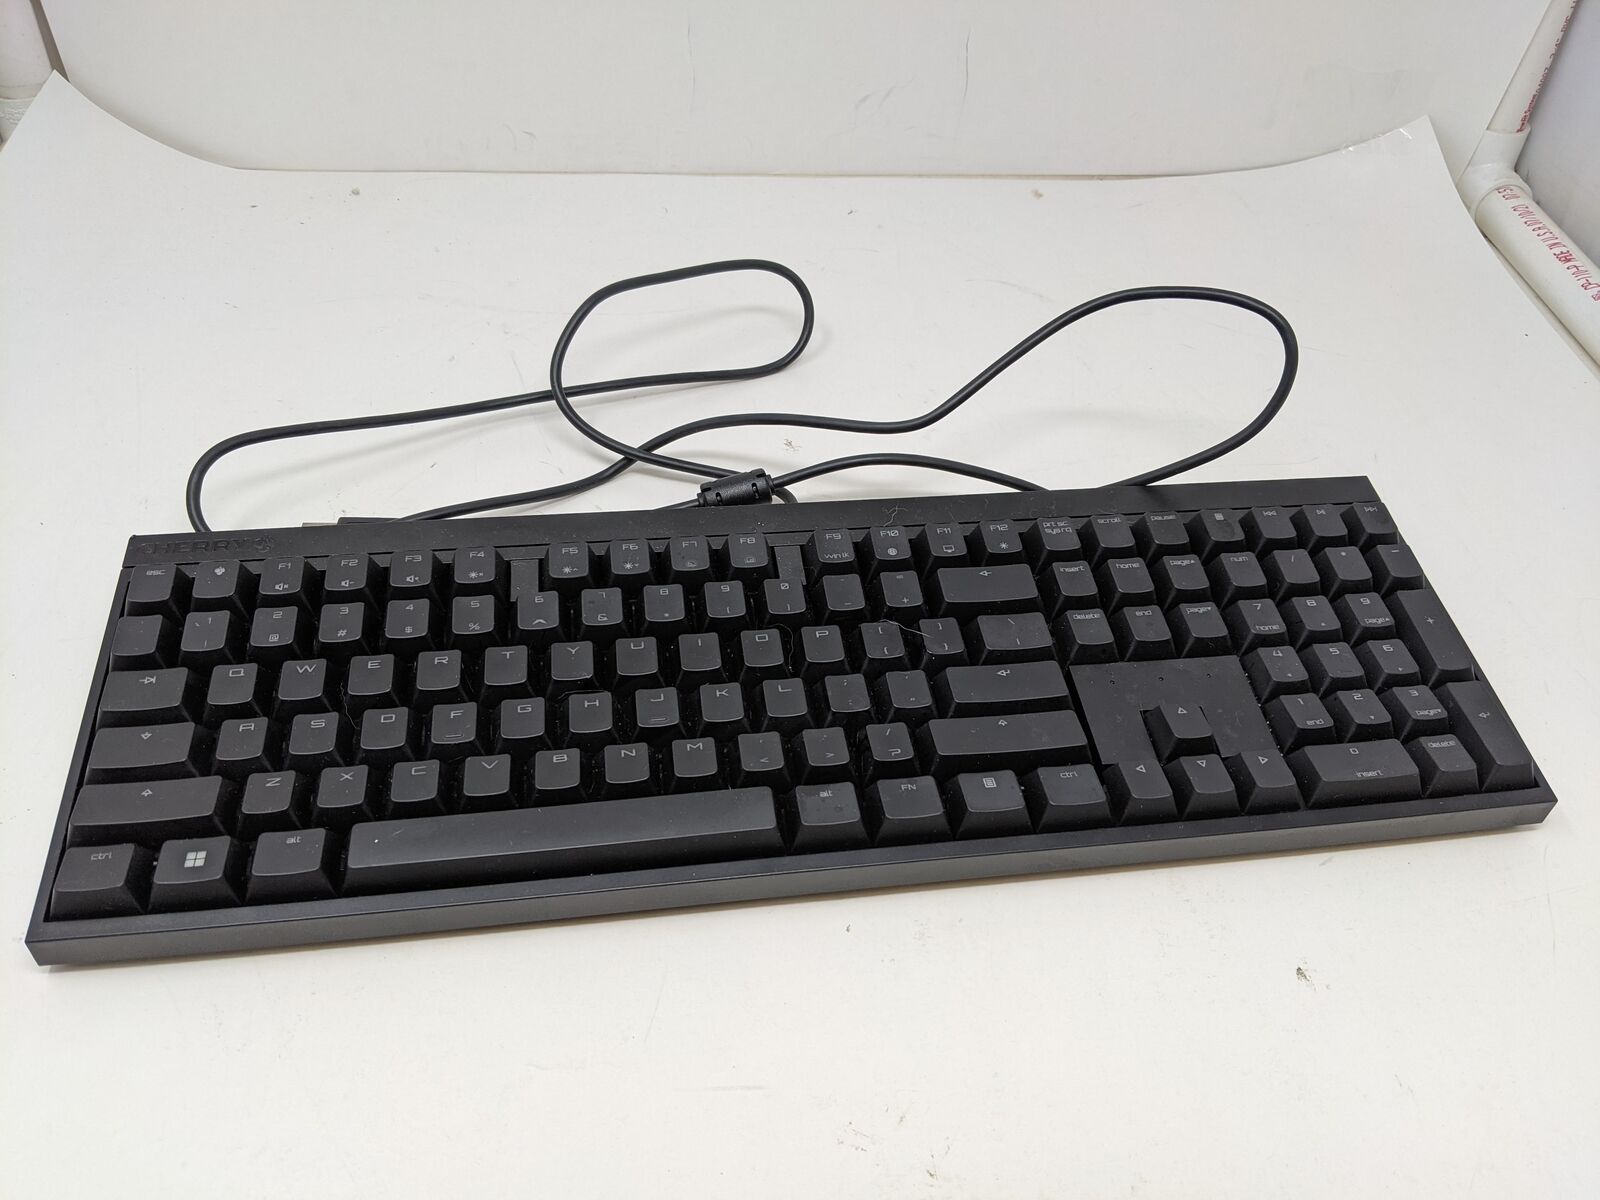 CHERRY MX 2.0S WIRED GAMING KEYBOARD 802R